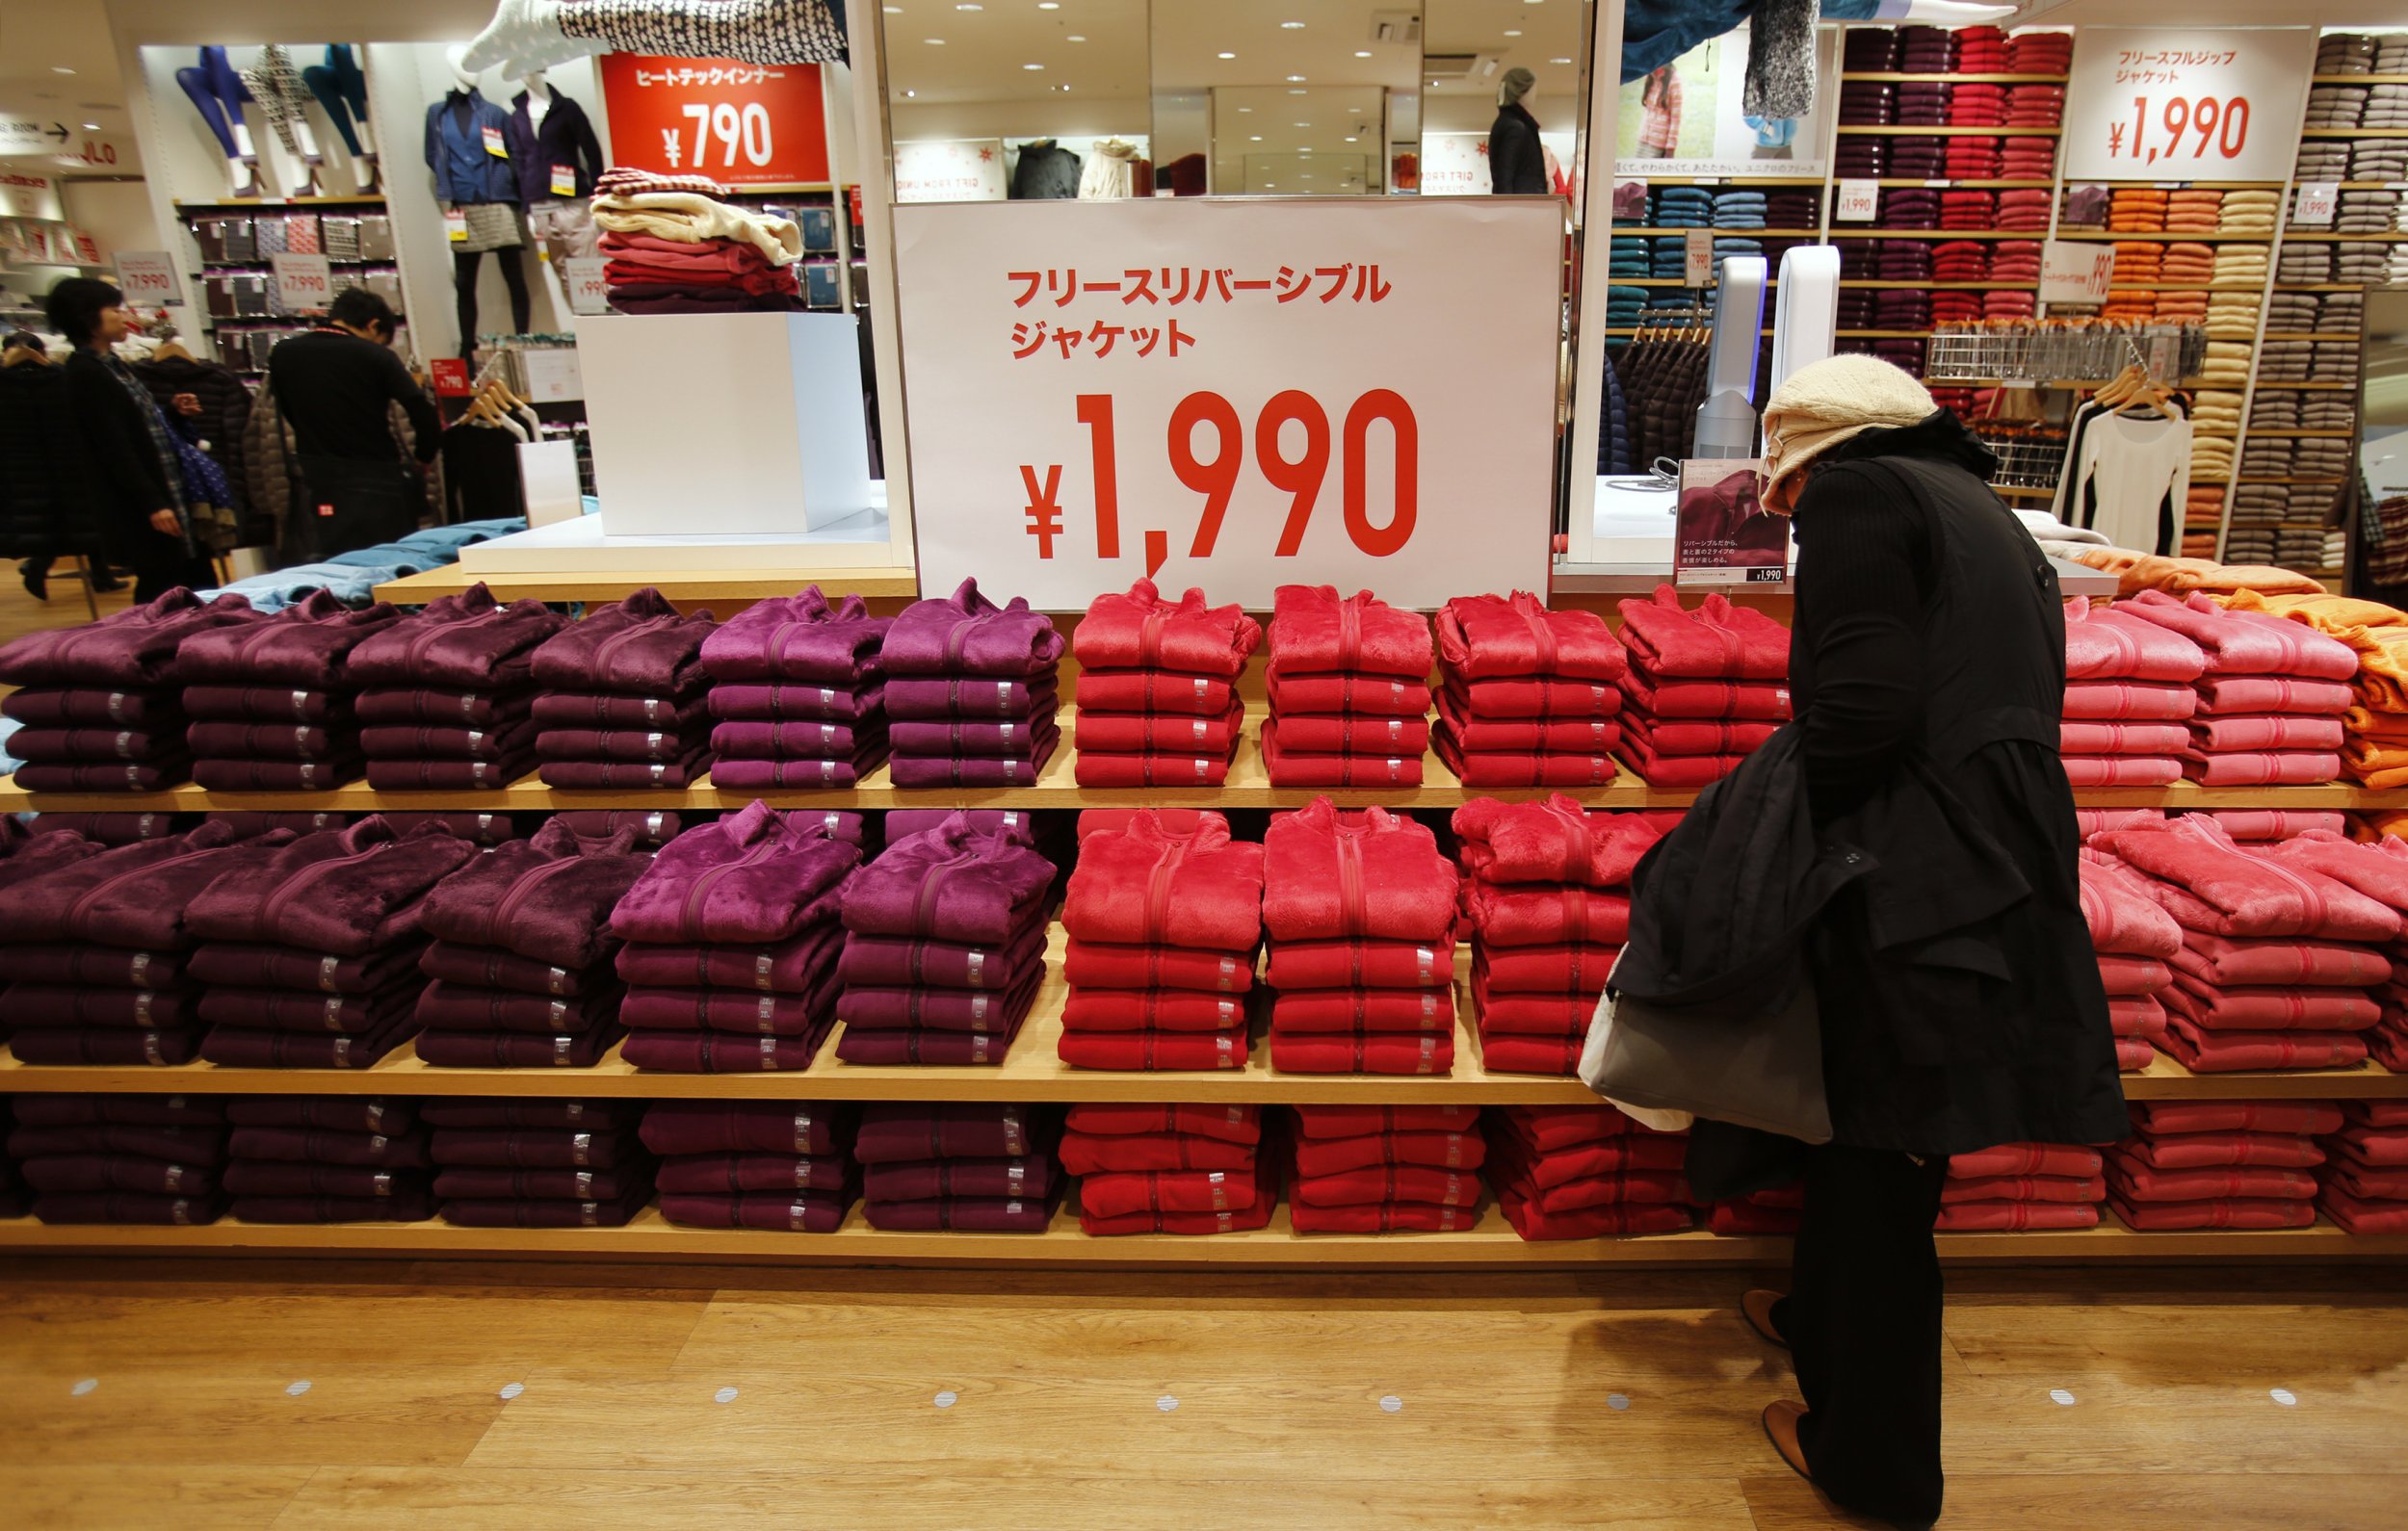 Uniqlo: Fashion giant to raise pay in Japan by up to 40% - BBC News